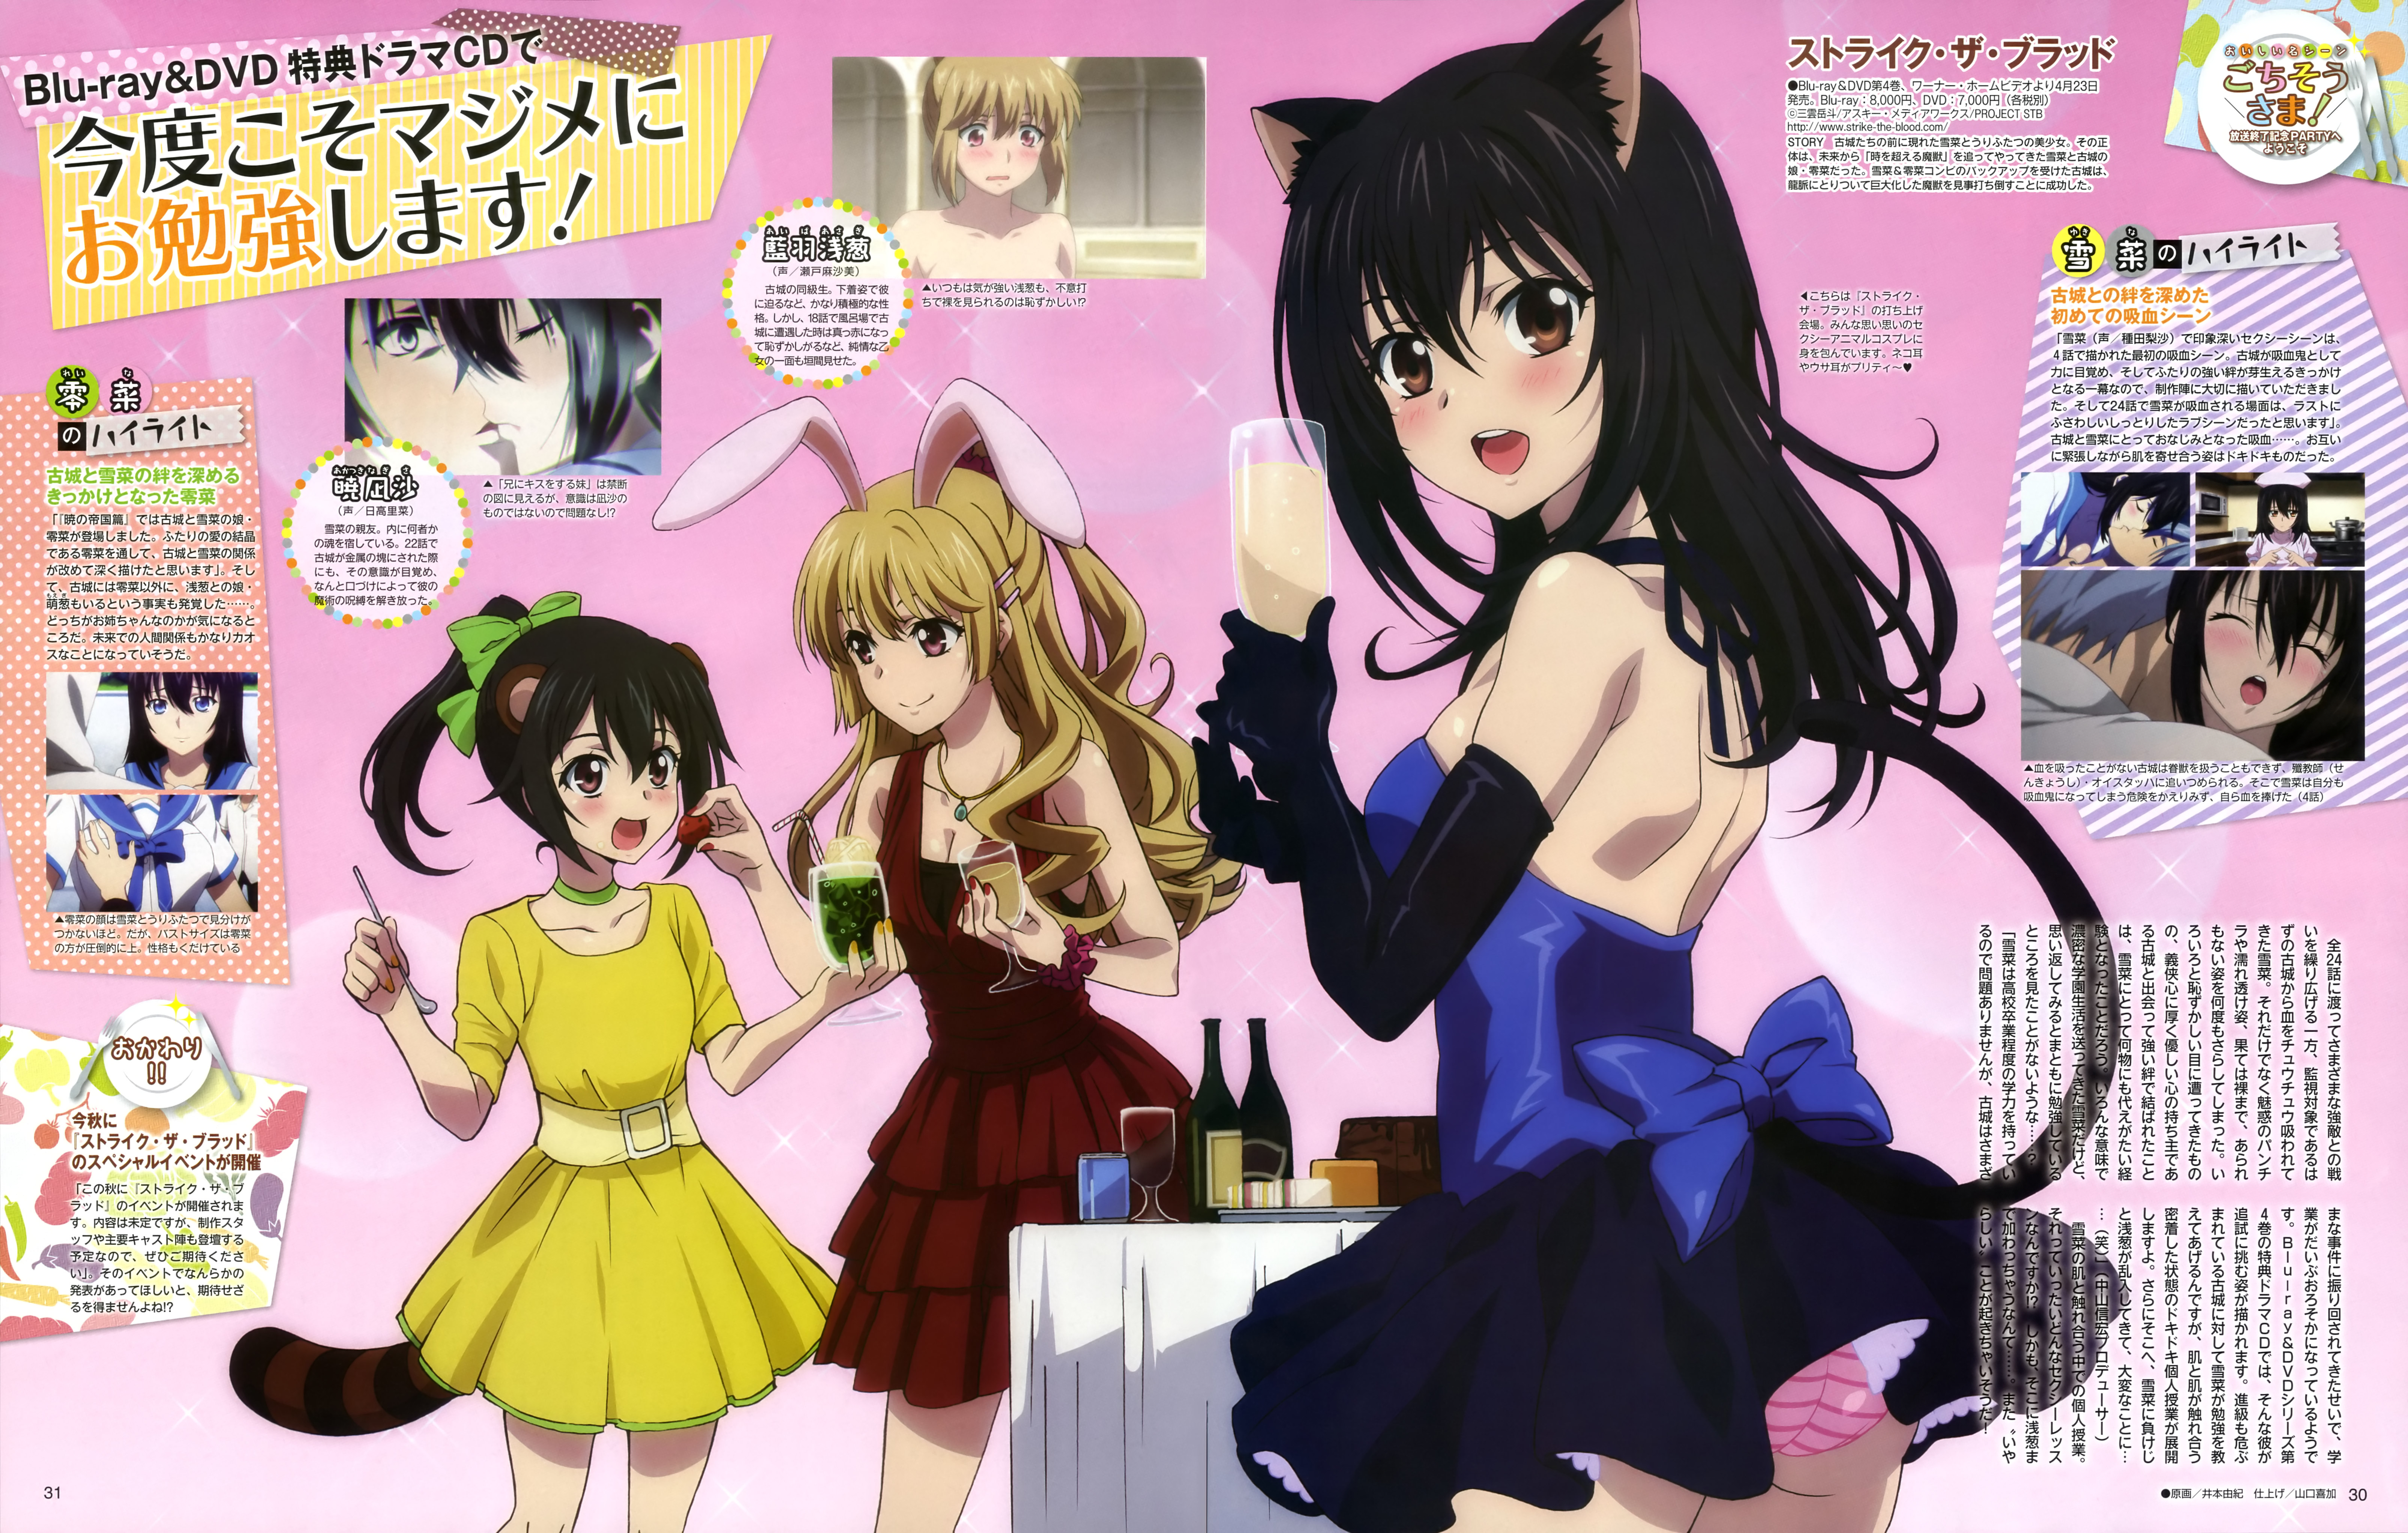 Top 10 Anime Series Streamed from NewType’s May 2015 Issue Strike the Blood